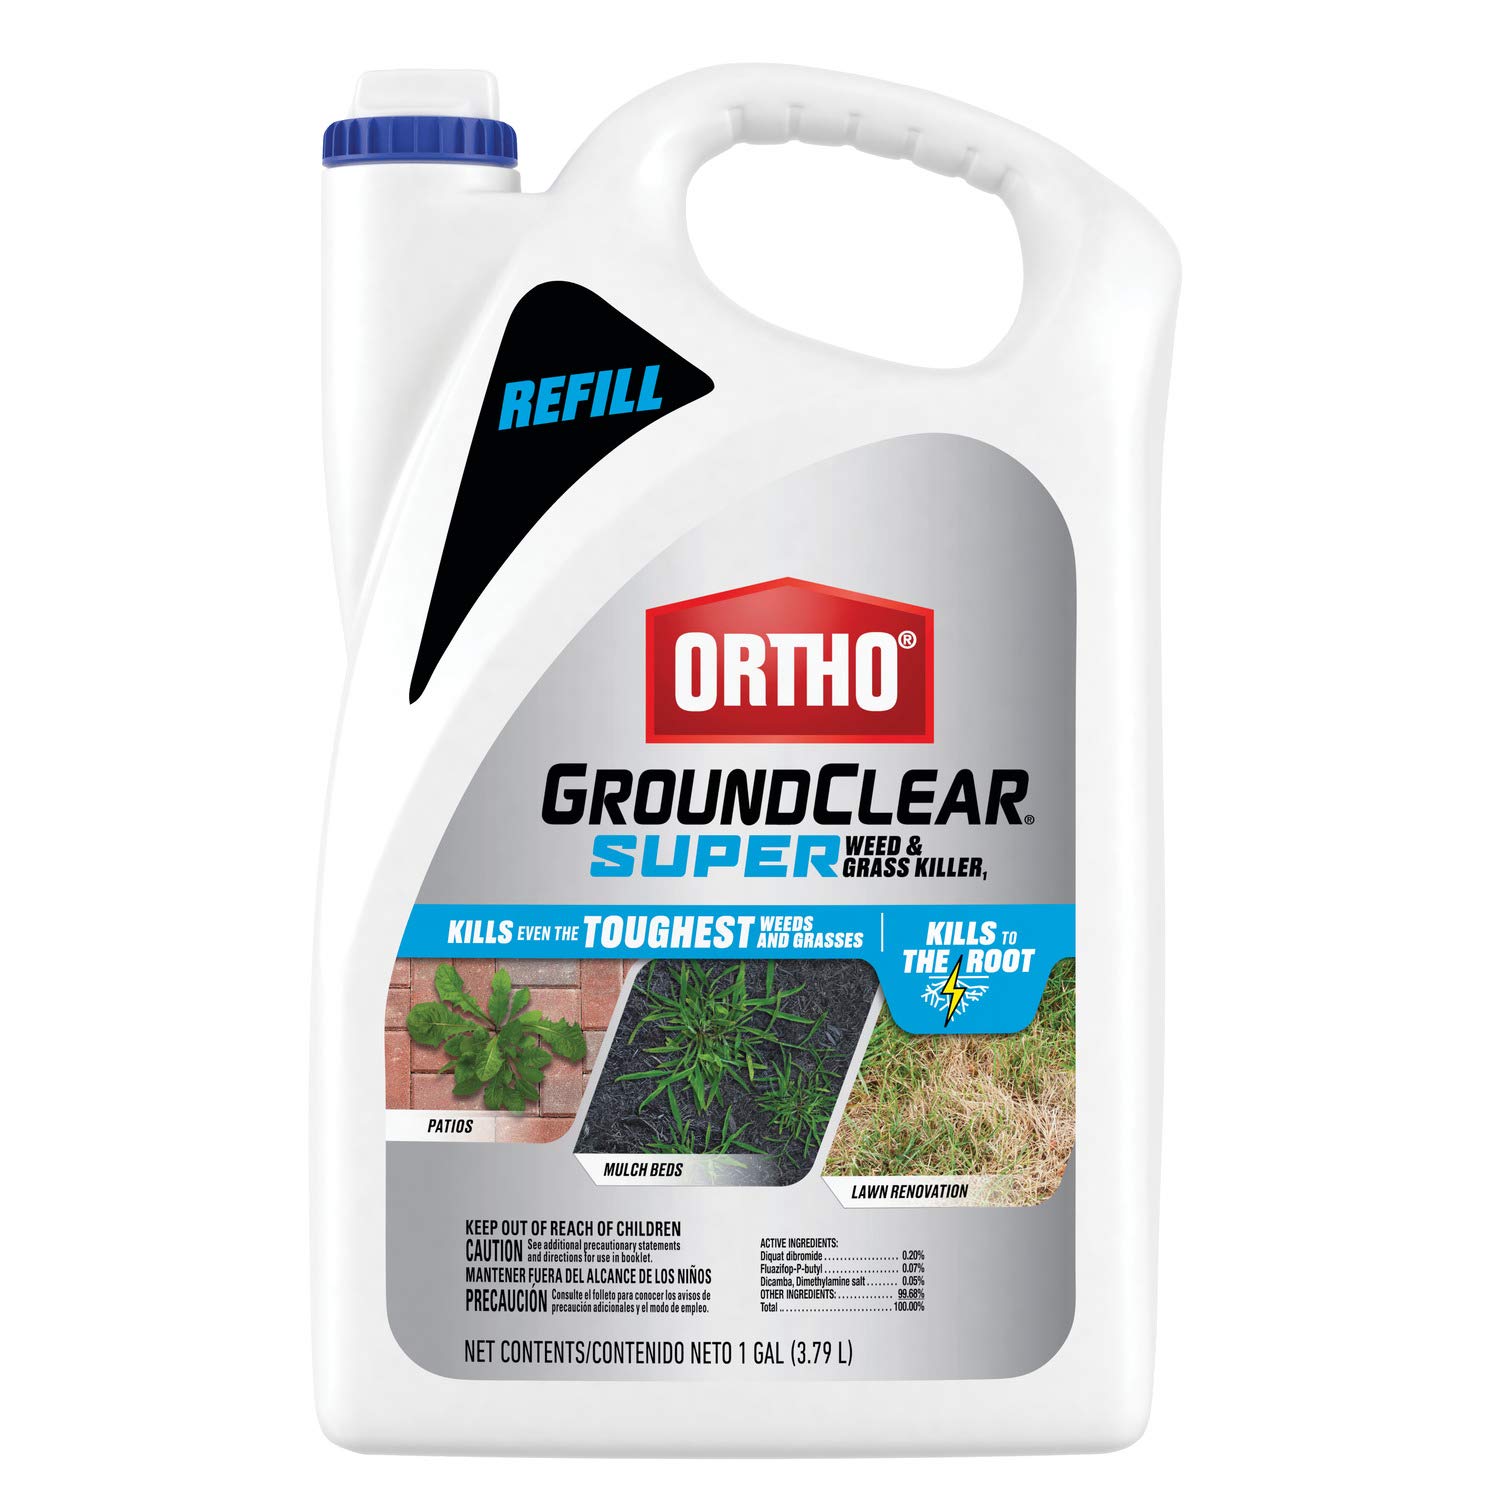 1-Gallon Ortho GroundClear Super Weed & Grass Killer Refill $8.97